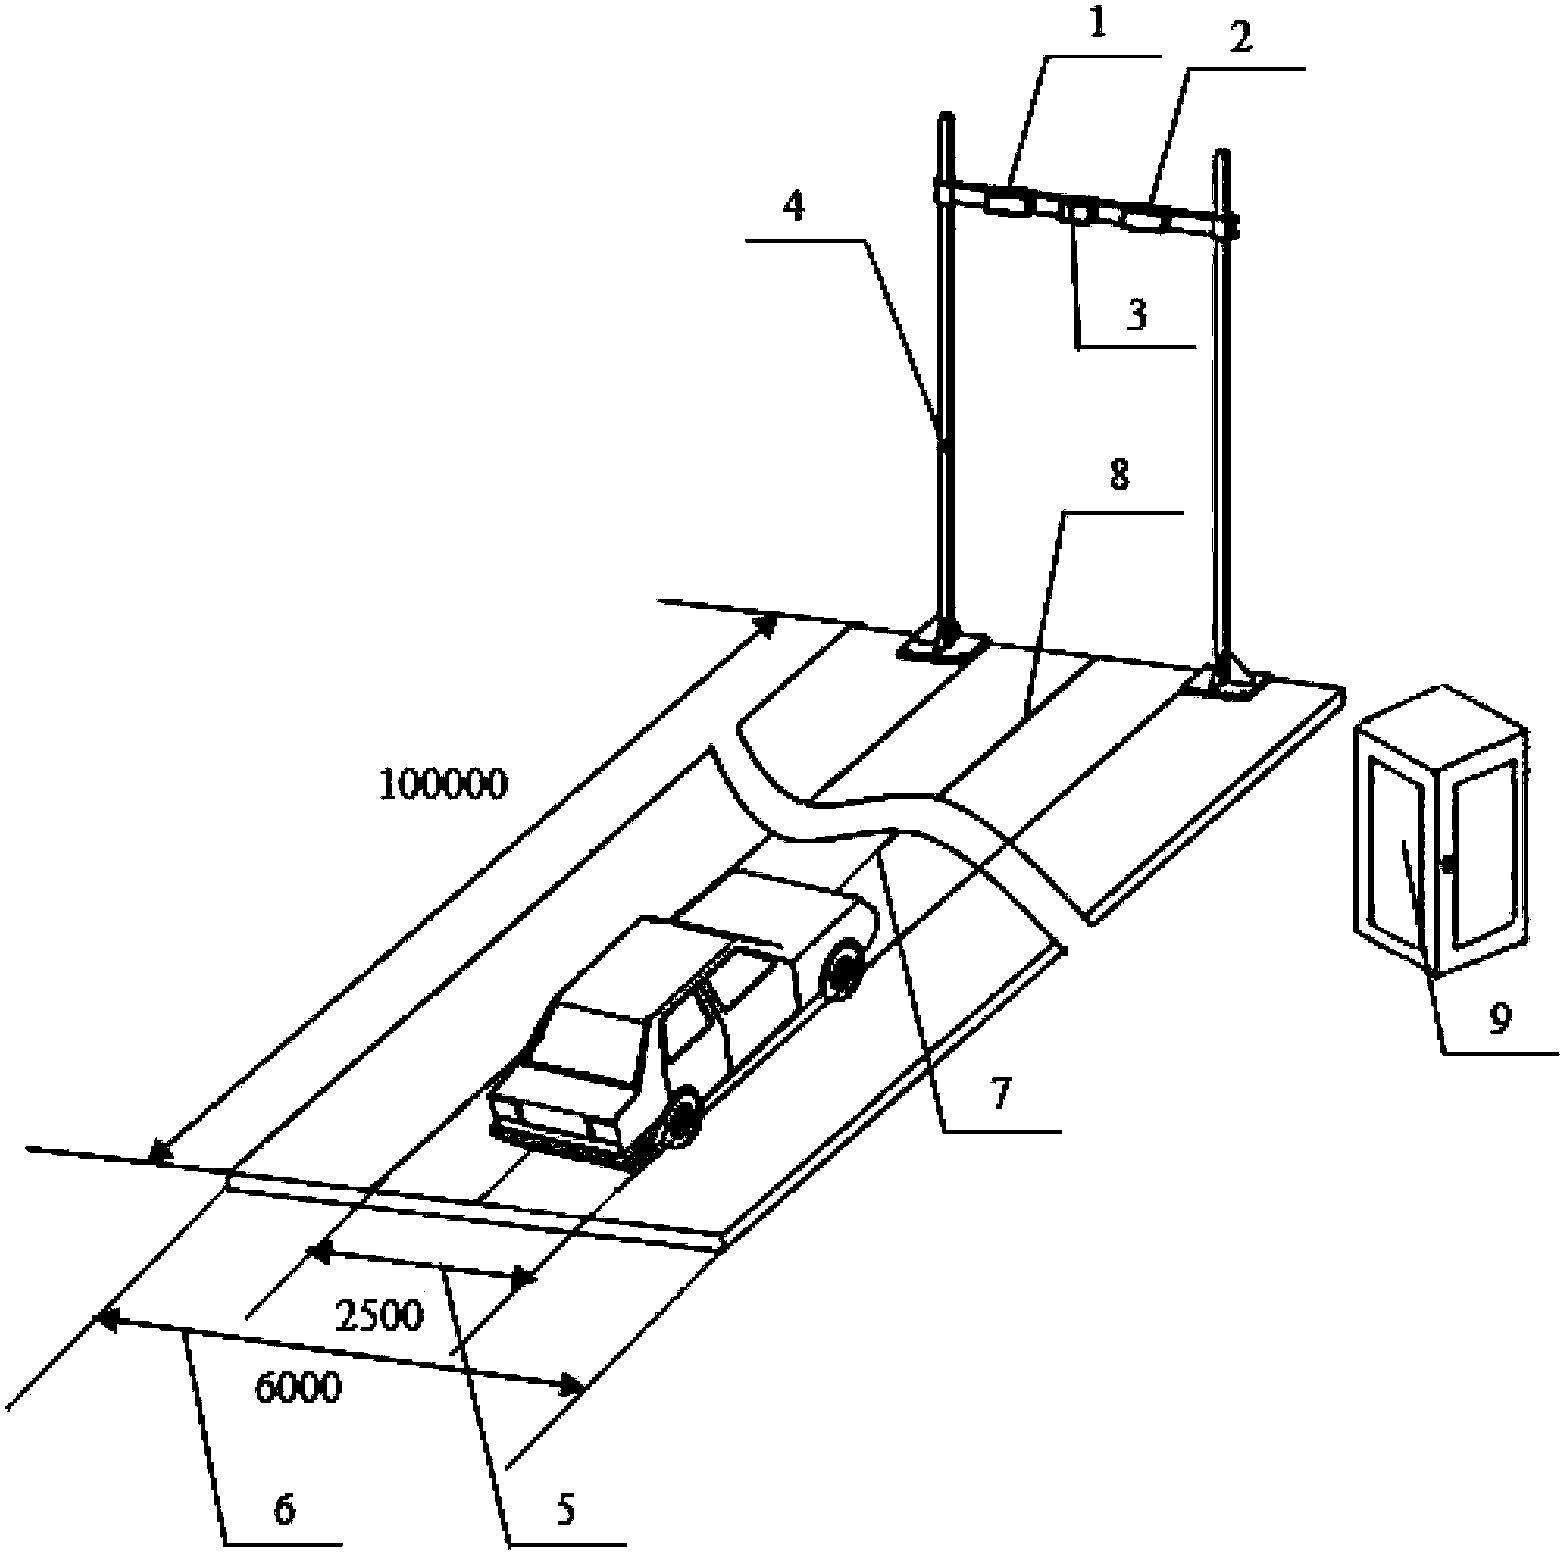 Device and method for testing brake performances based on stereoscopic vision